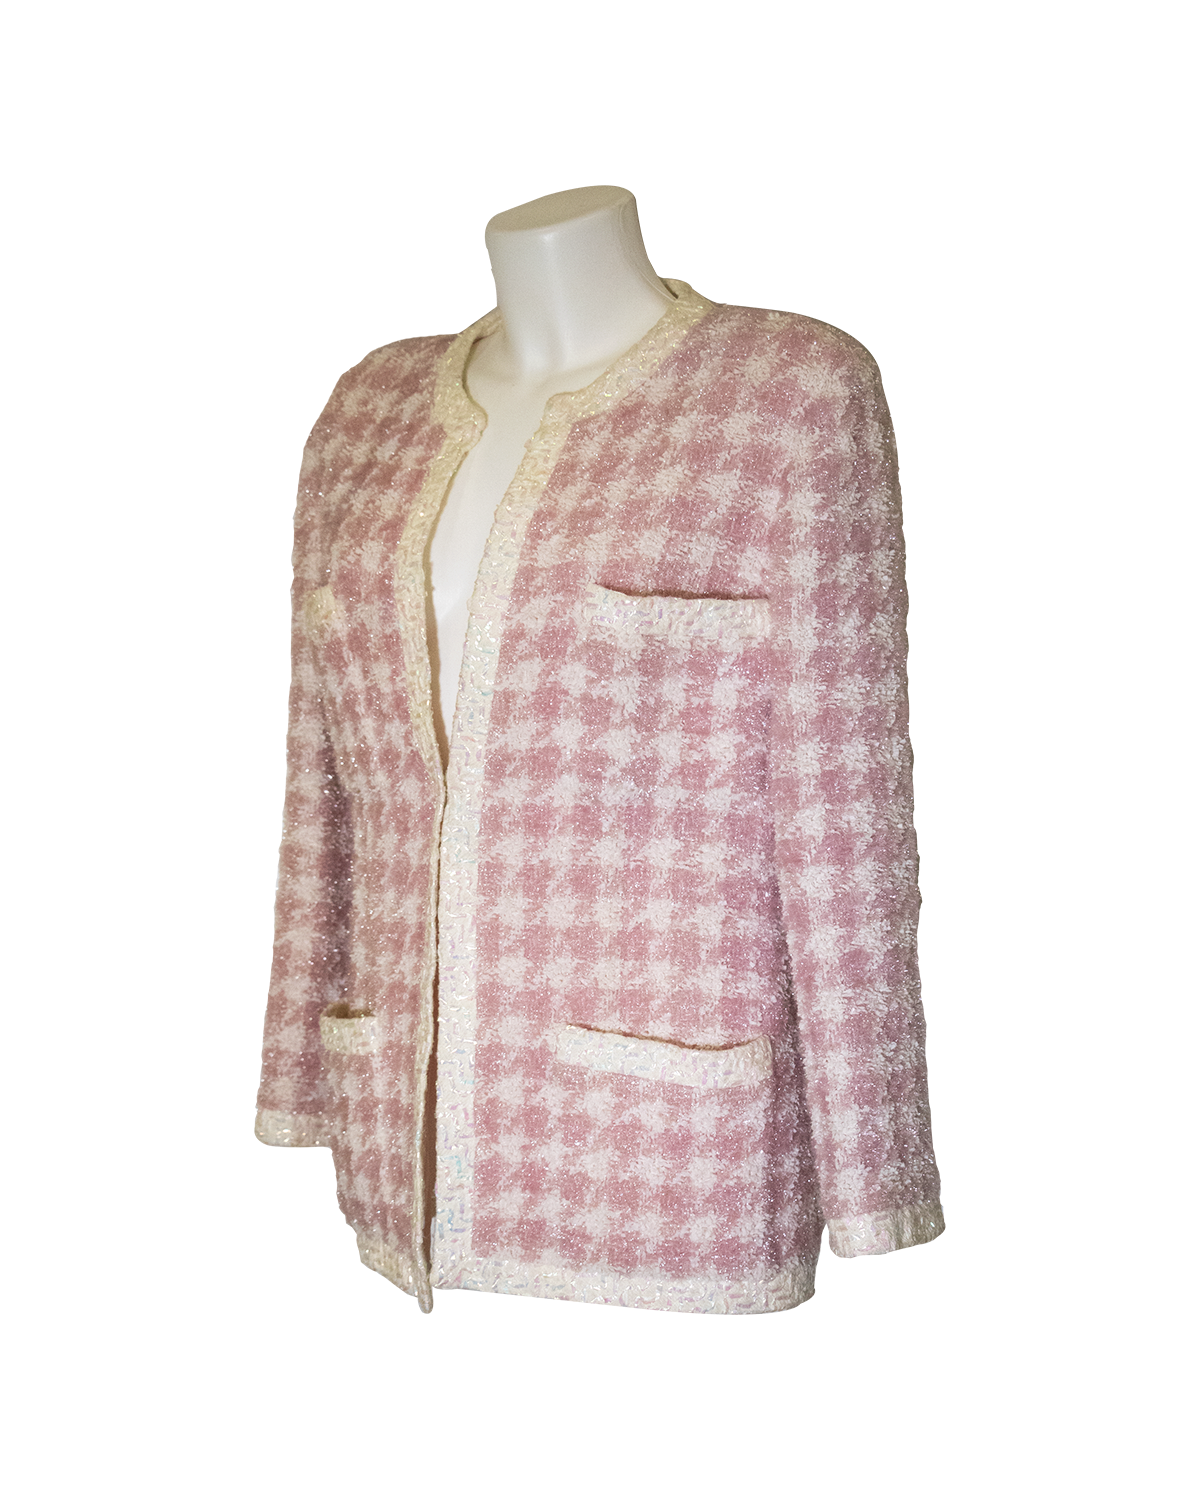 Chanel Pied de Poule Pink Jacket from 1980s